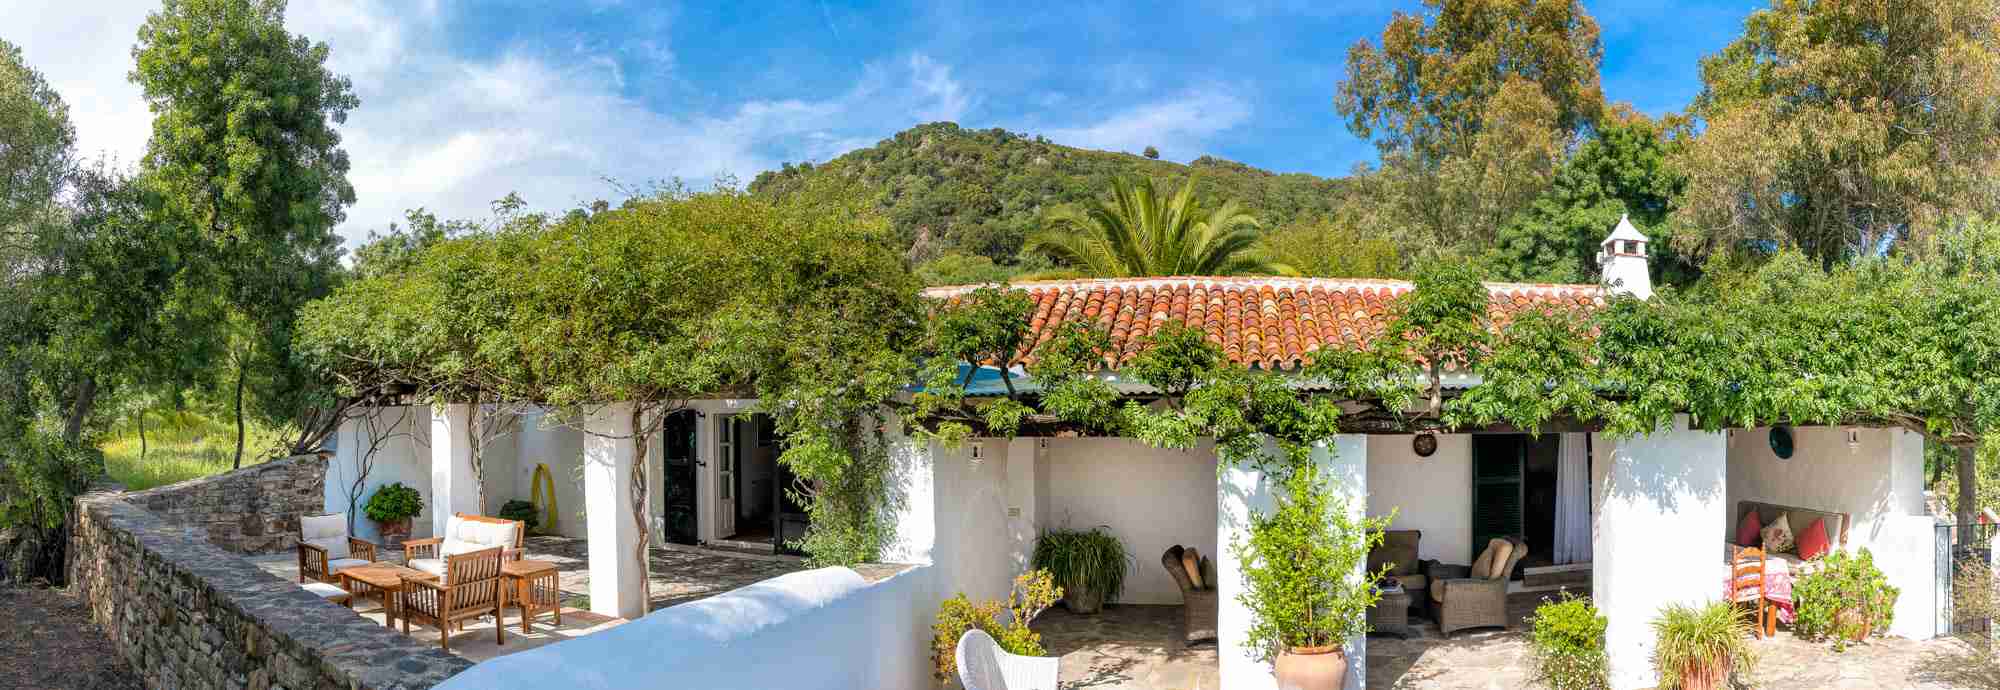 A farmhouse in traditional Andalusian style great for outdoor living